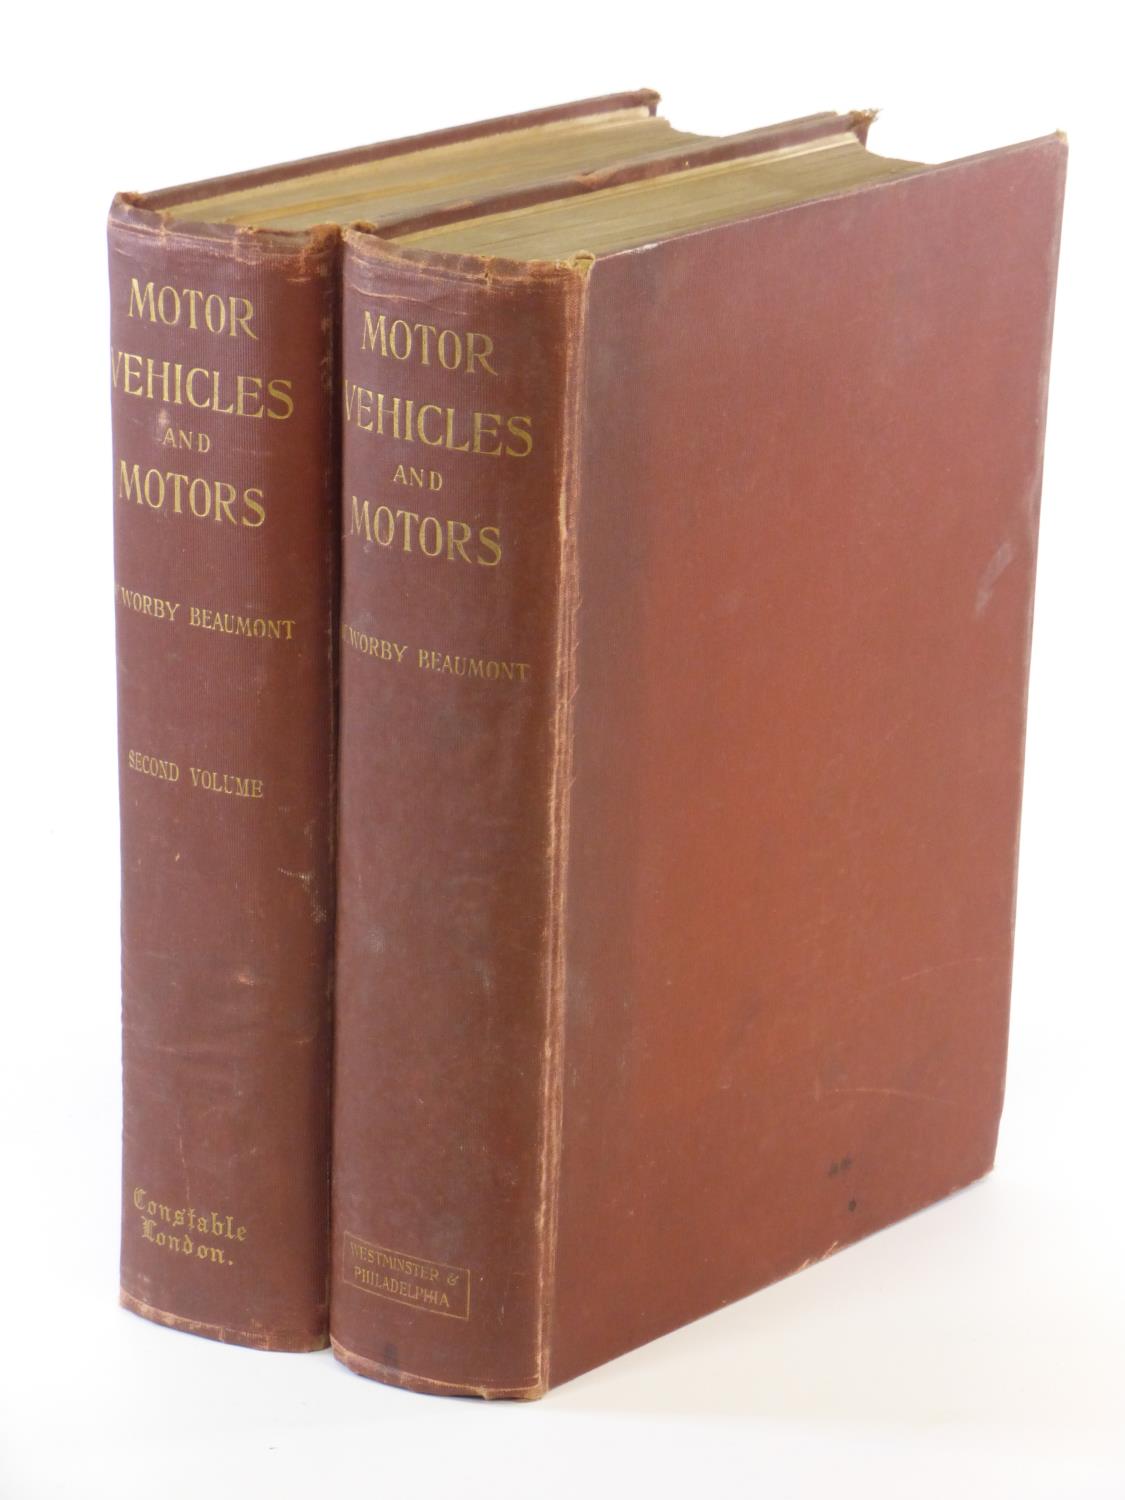 Motor Vehicles and Motors by Worby Beaumont. Two-volumes published in London by Archibald